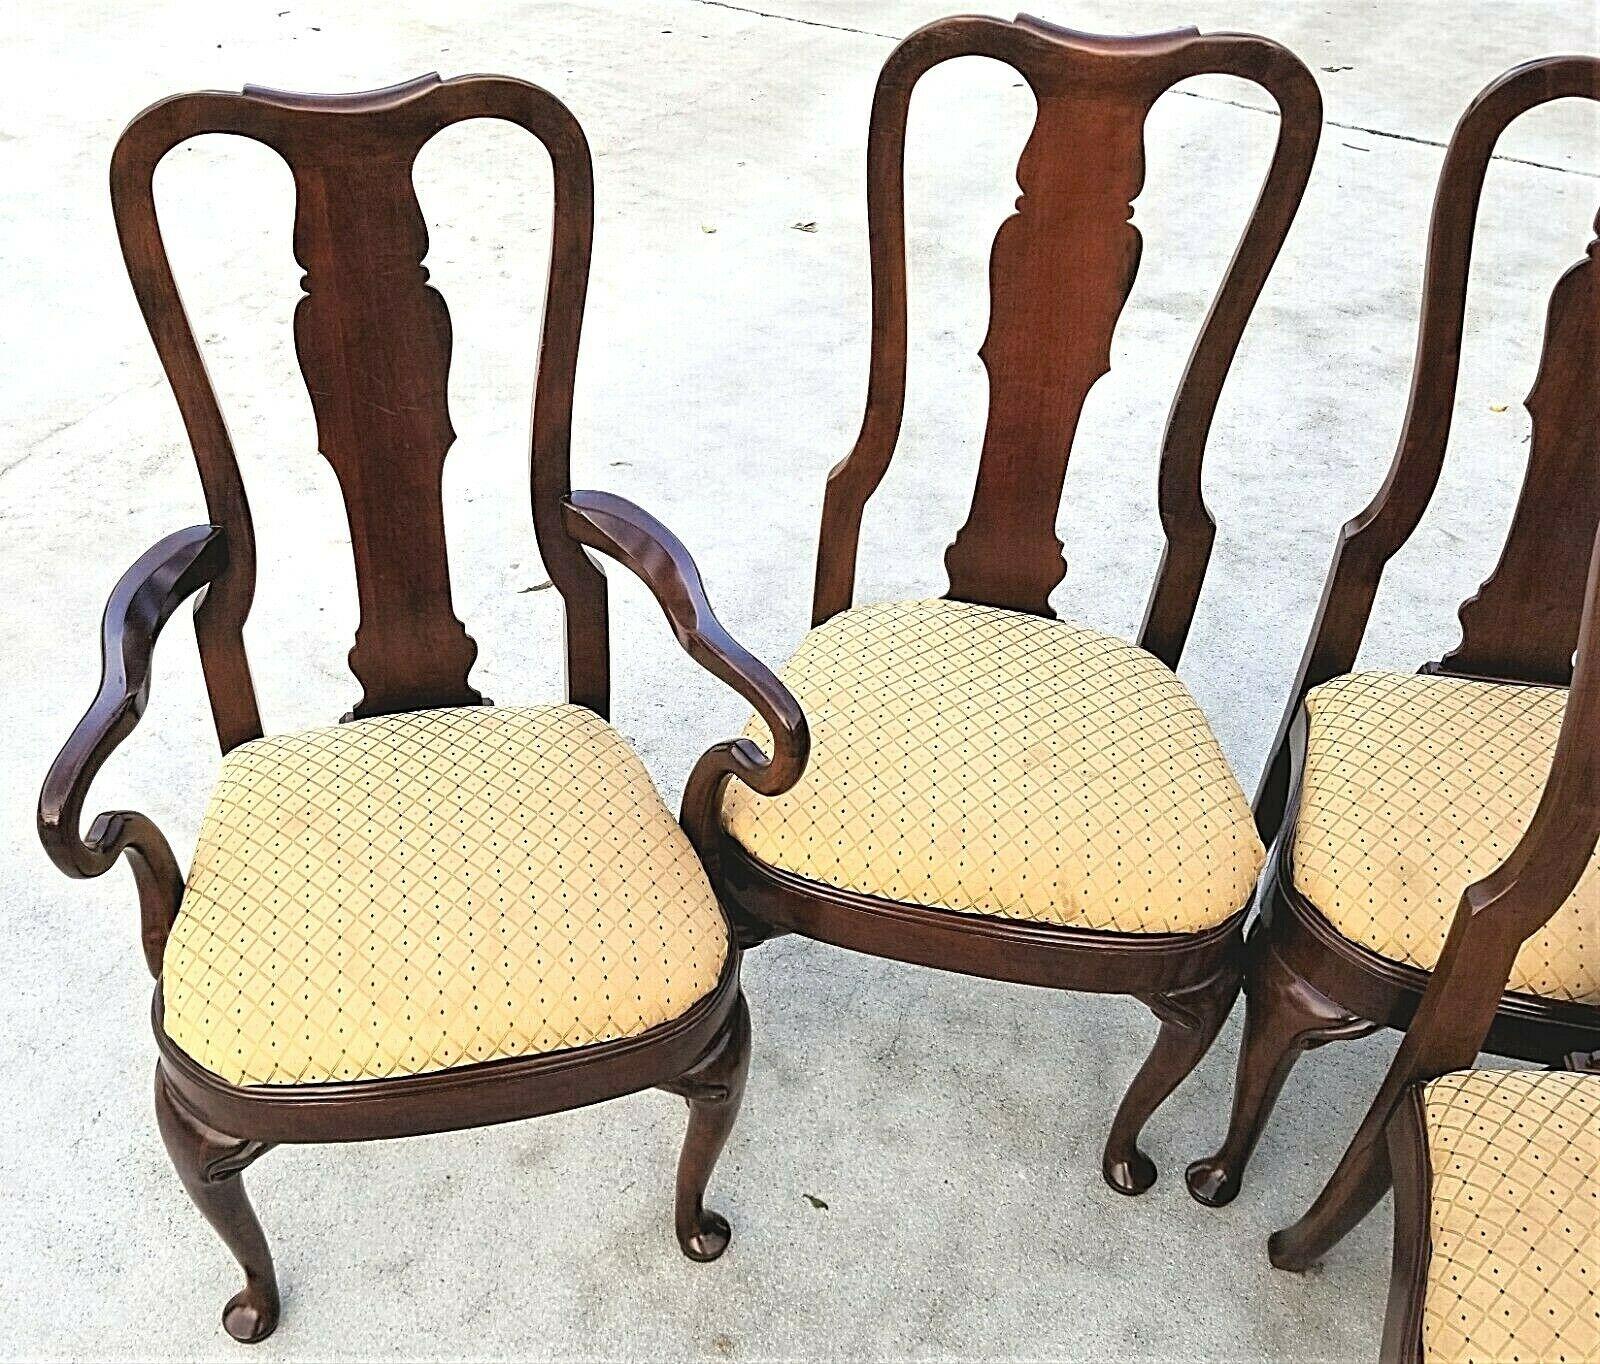 For FULL item description be sure to click on CONTINUE READING at the bottom of this listing.

Offering One Of Our Recent Palm Beach Estate Fine Furniture Acquisitions Of A Set of 6 Vintage Solid Mahogany Geroge II Queen Anne Style Splat Back